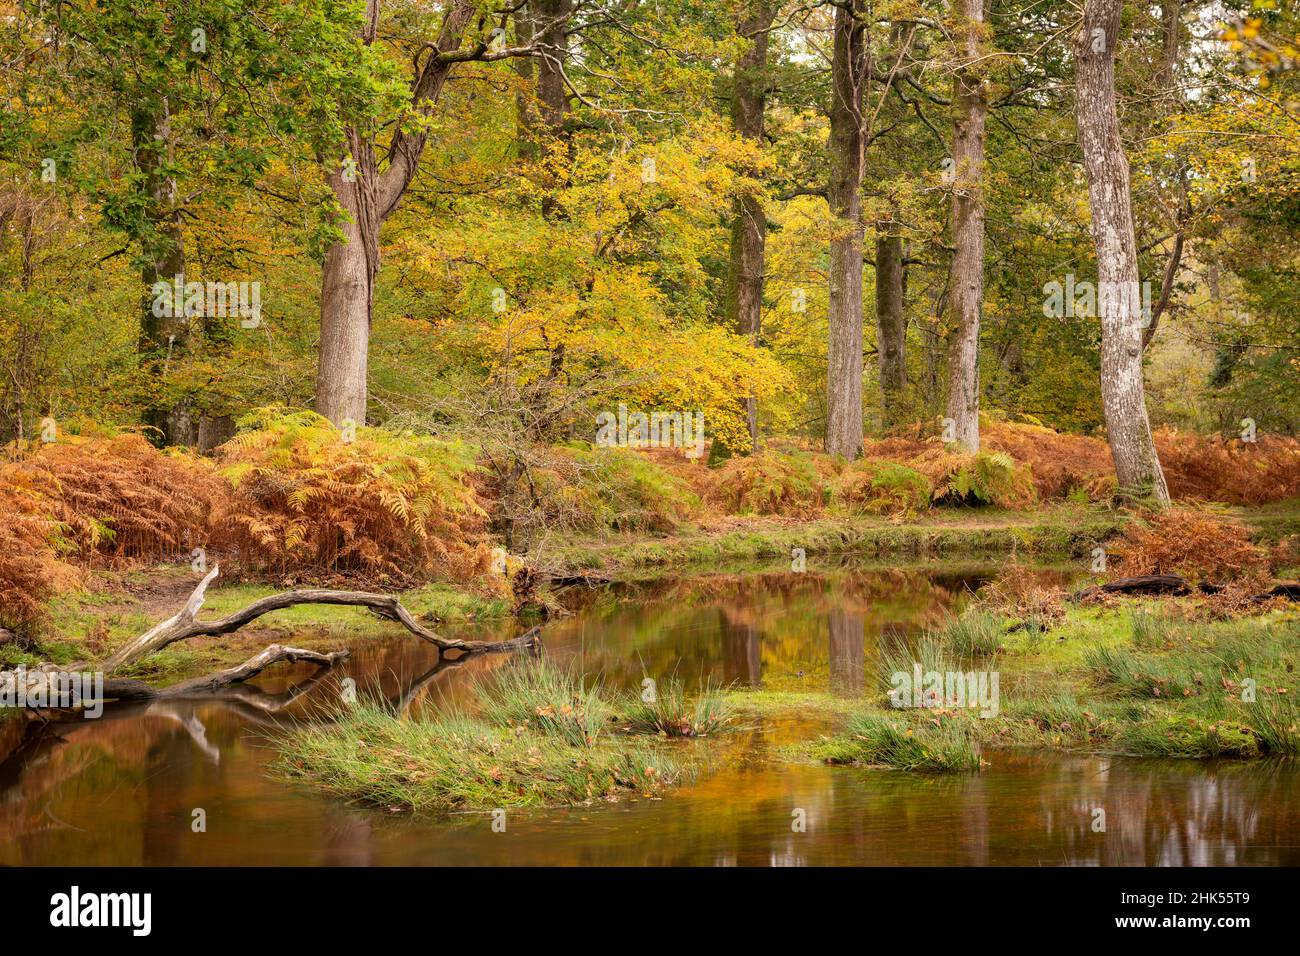 Autumn foliage on the banks of Black Water River in the New Forest National Park, Hampshire, England, United Kingdom, Europe Stock Photo